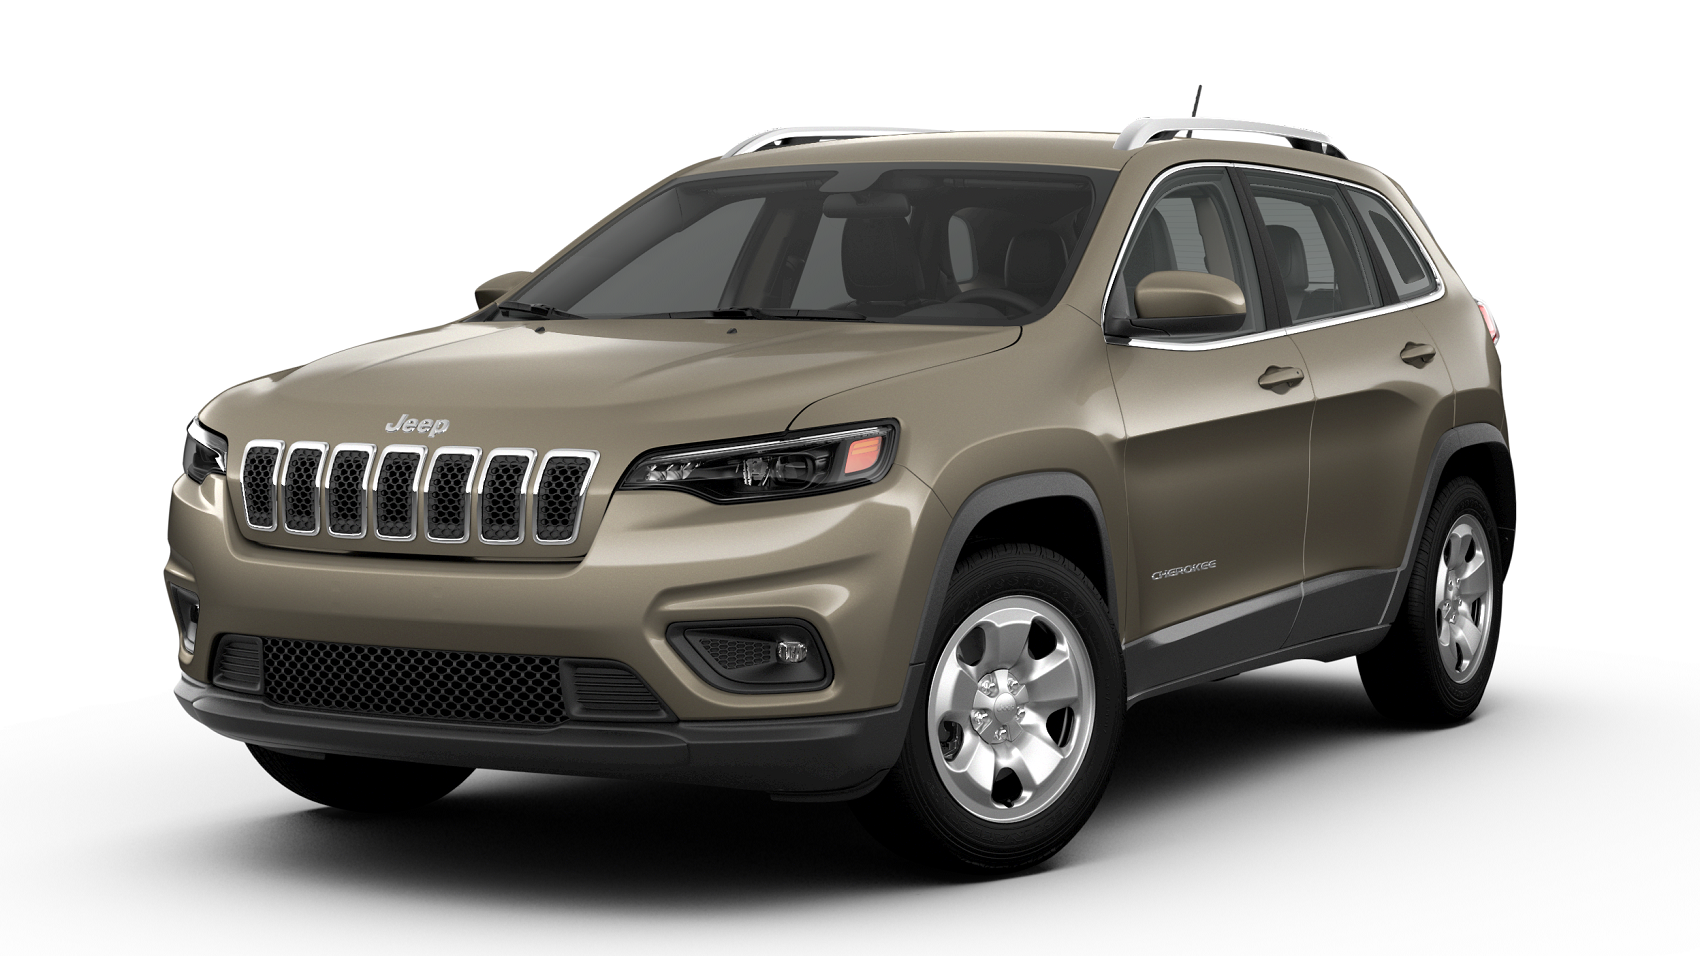 2020 Jeep Cherokee Review 